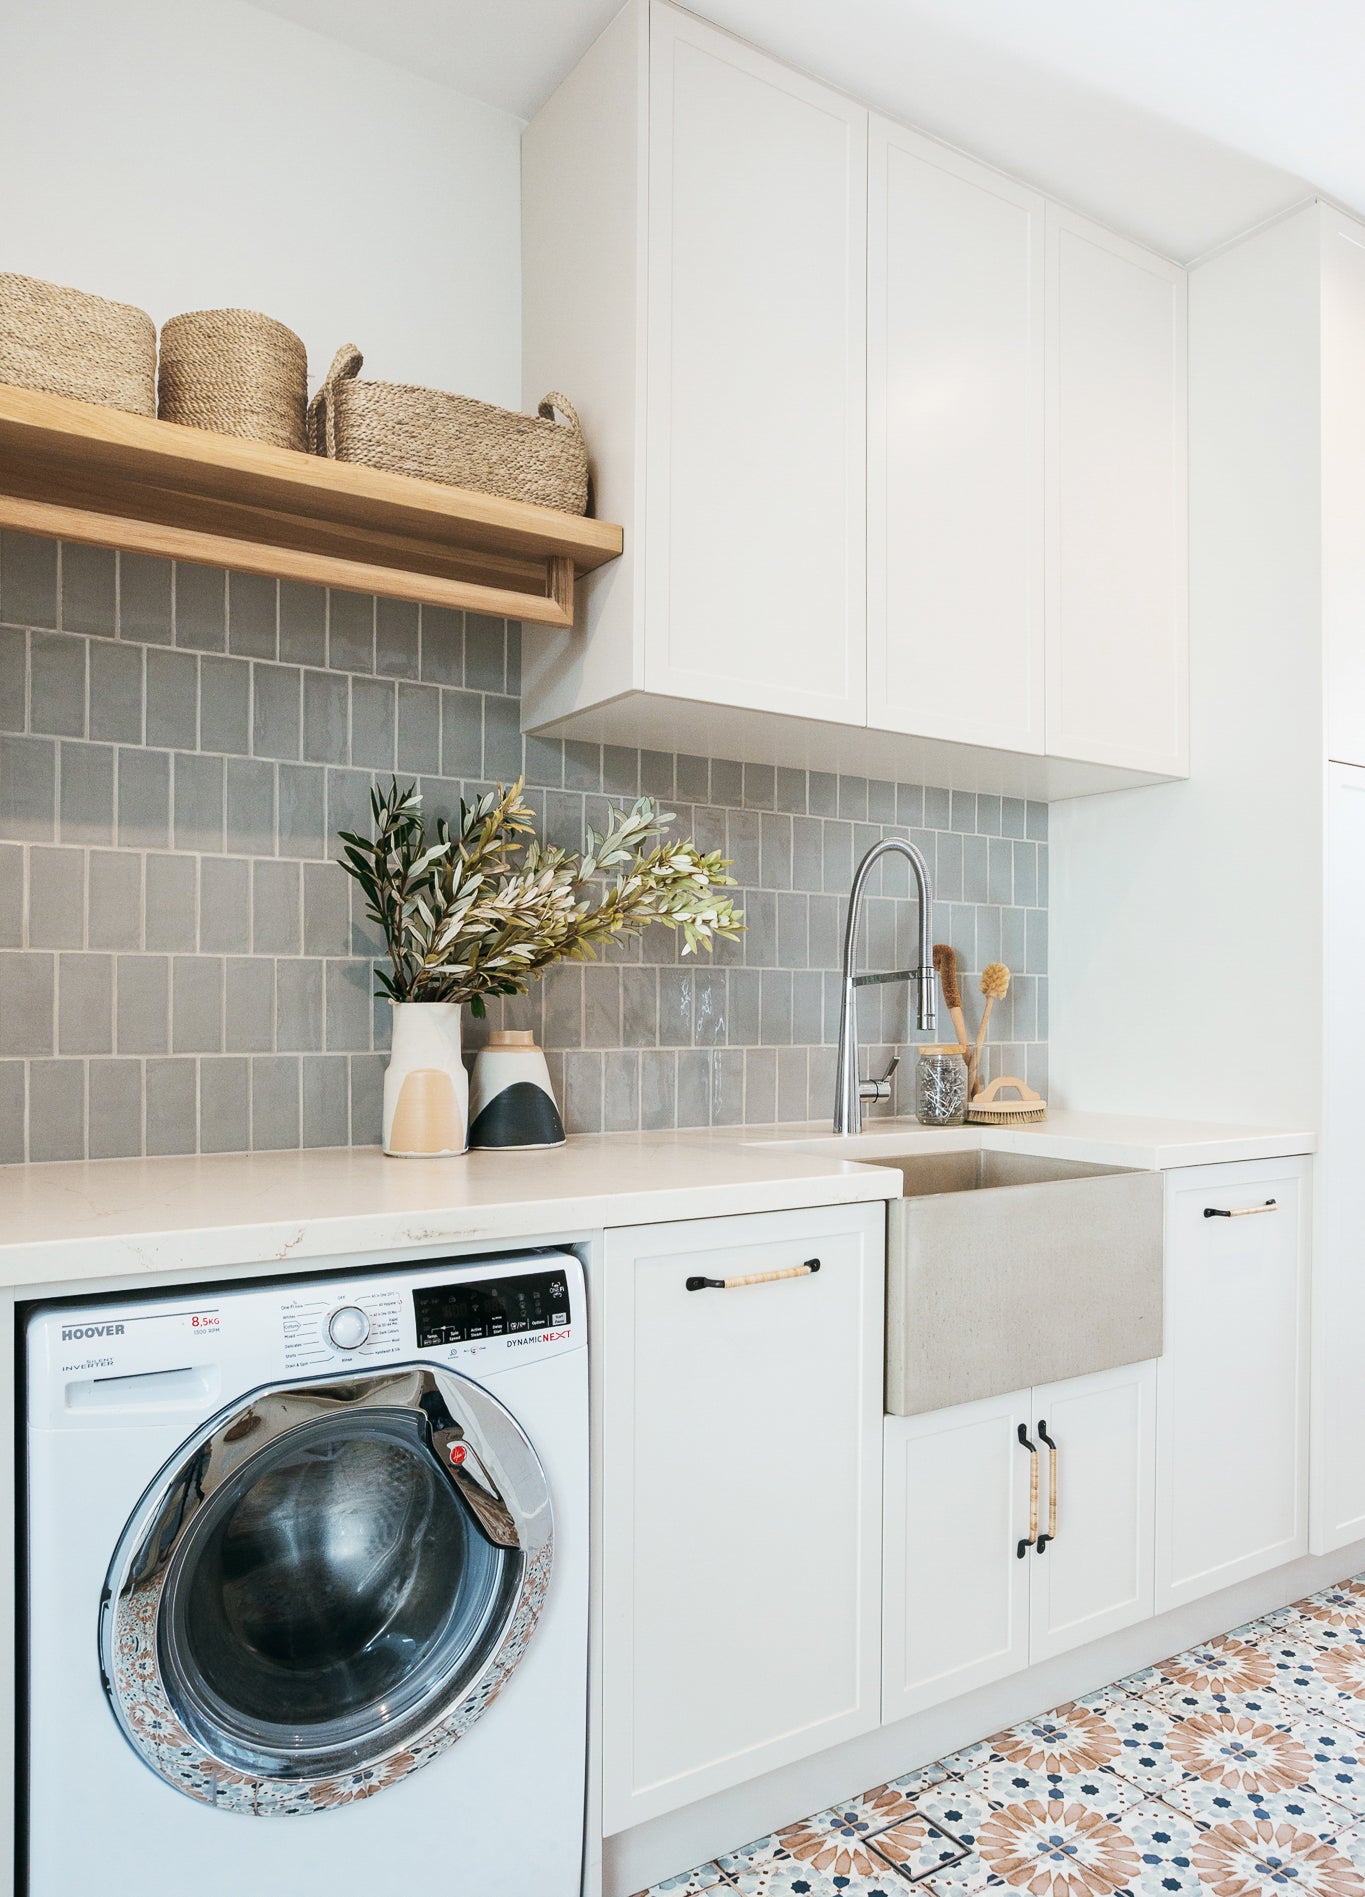 Styling Tips to Elevate Your Laundry Room